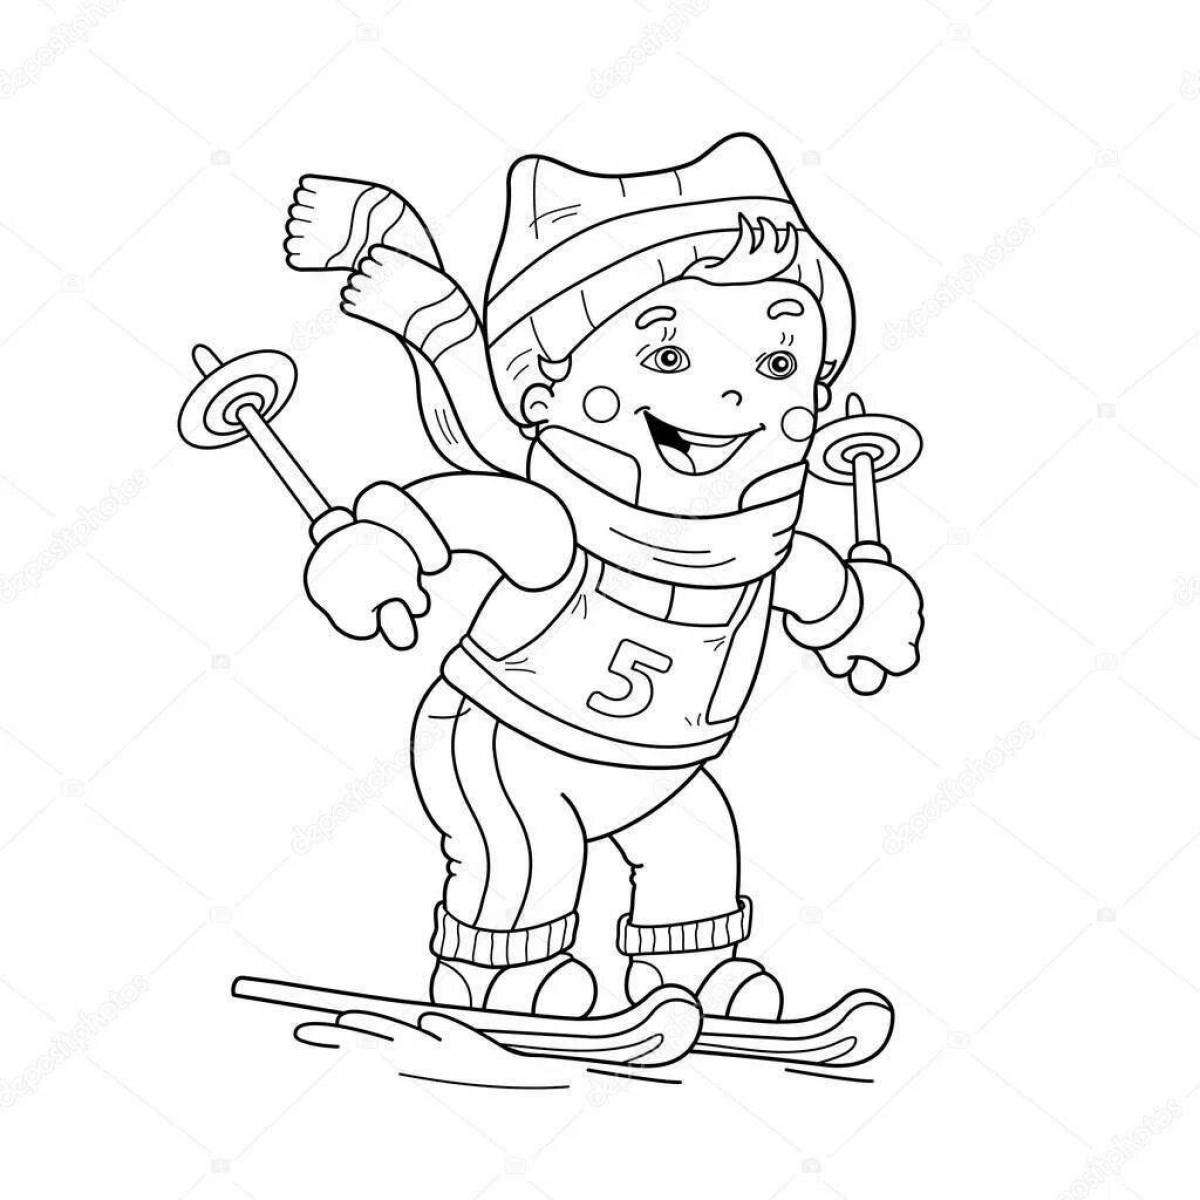 Colourful coloring book winter sports for preschoolers